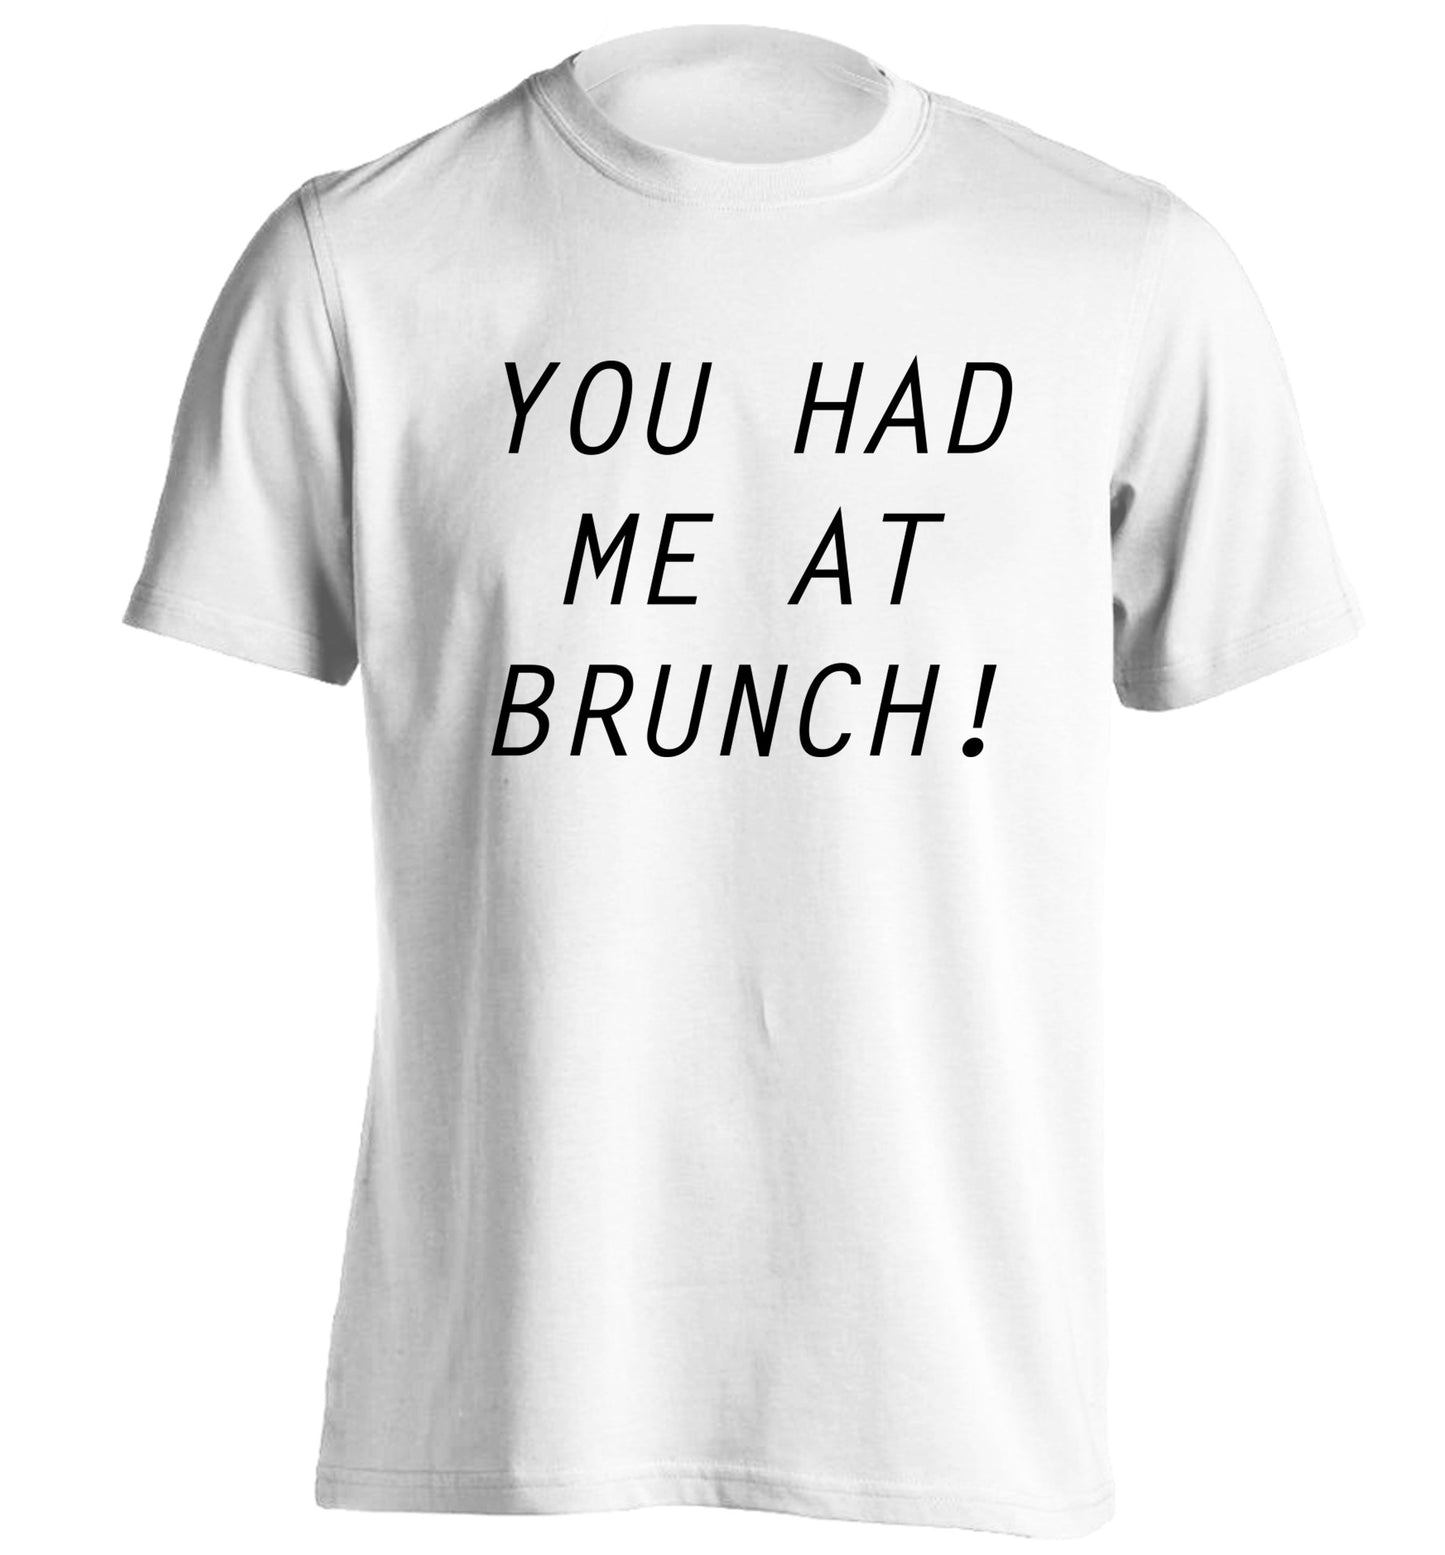 You had me at brunch adults unisex white Tshirt 2XL